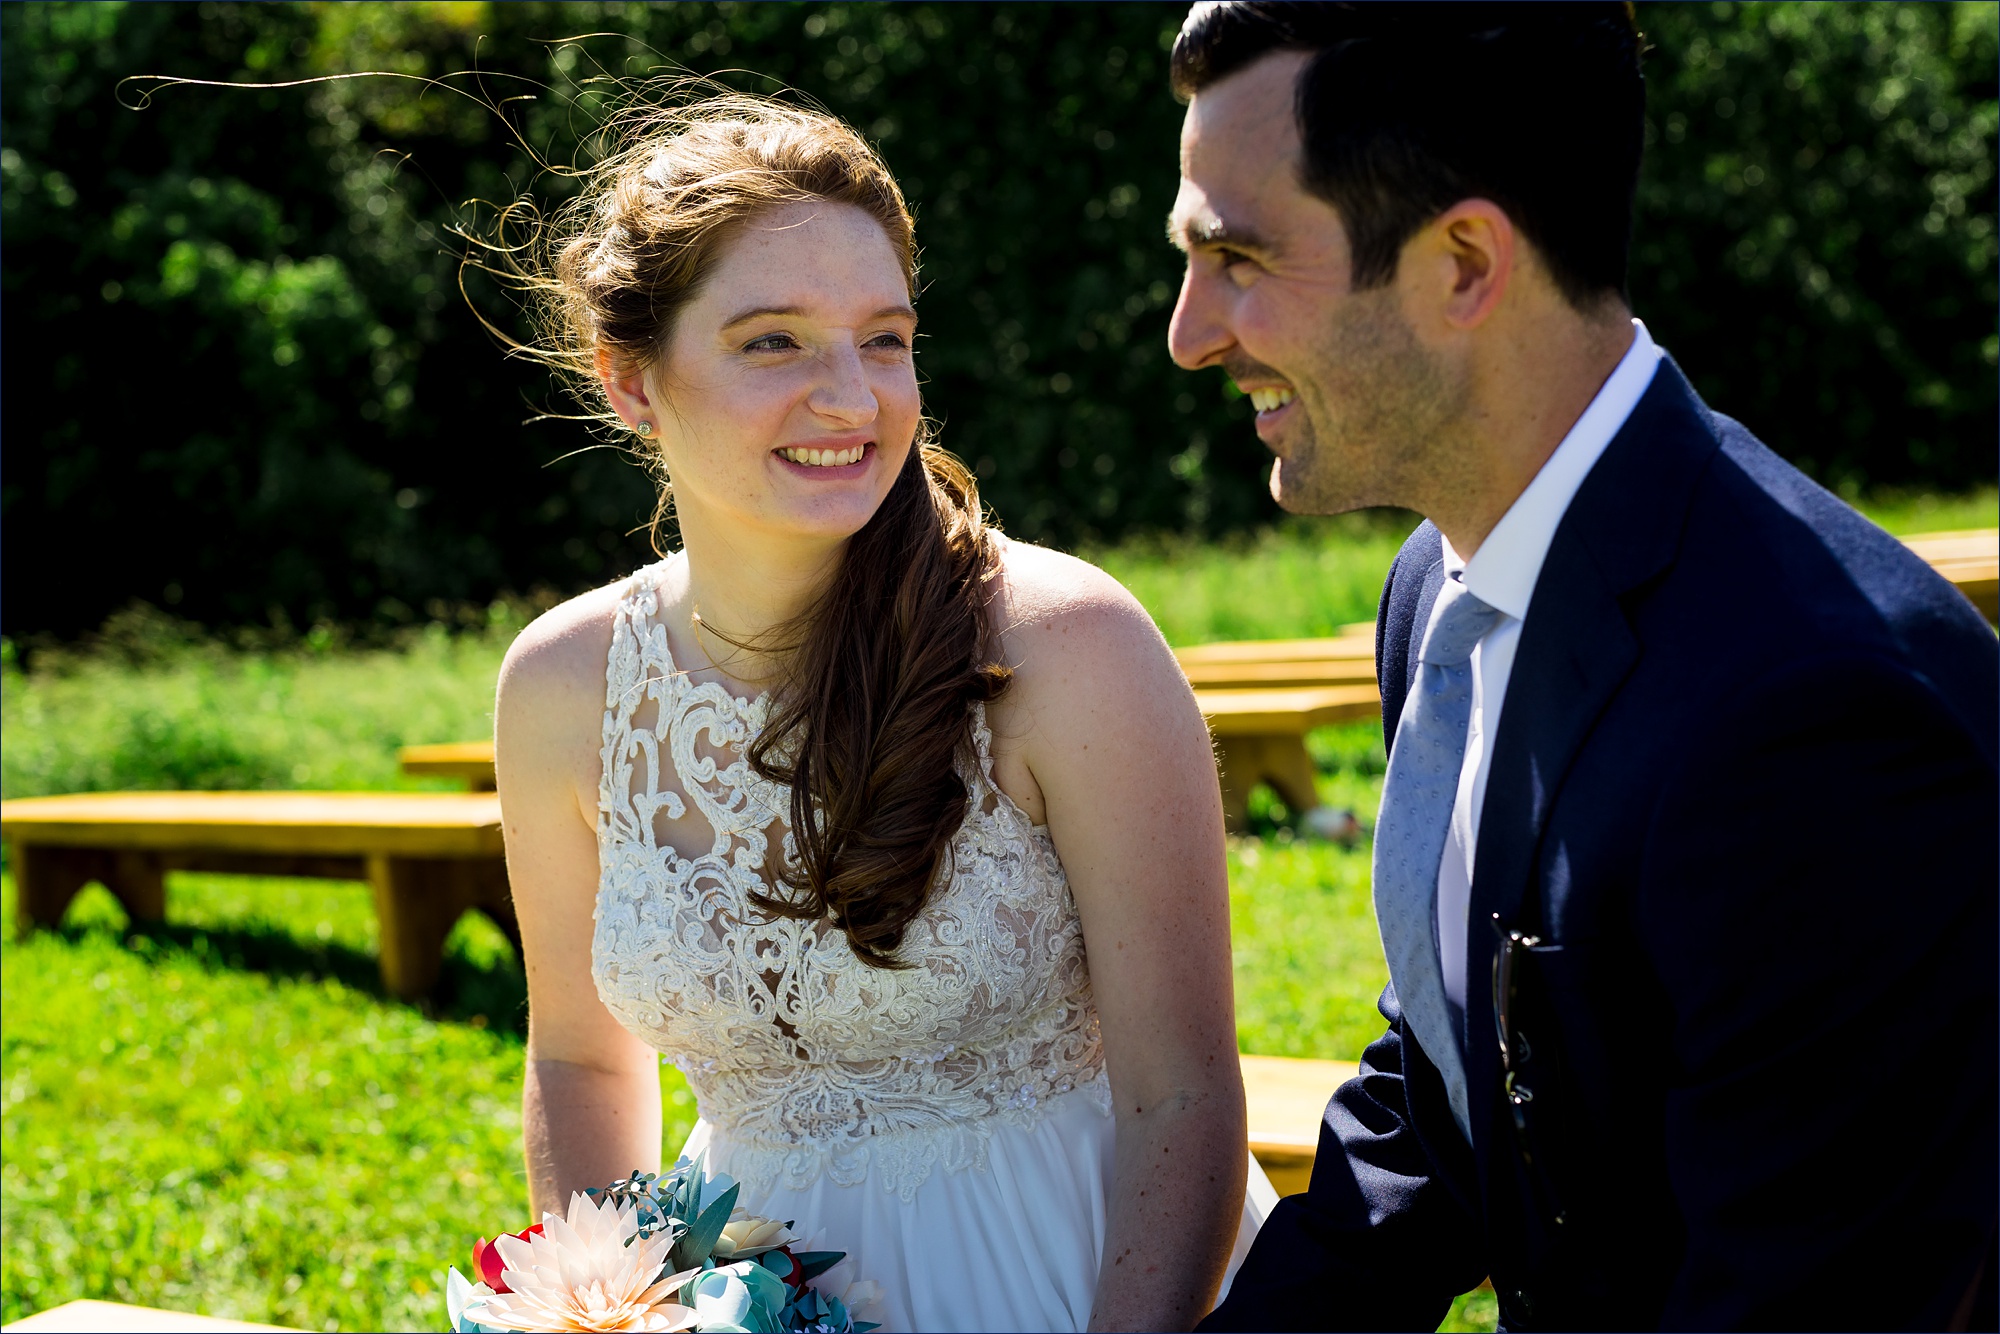 The bride and groom sit together and discuss their wedding day adventure at Kitz Farm 